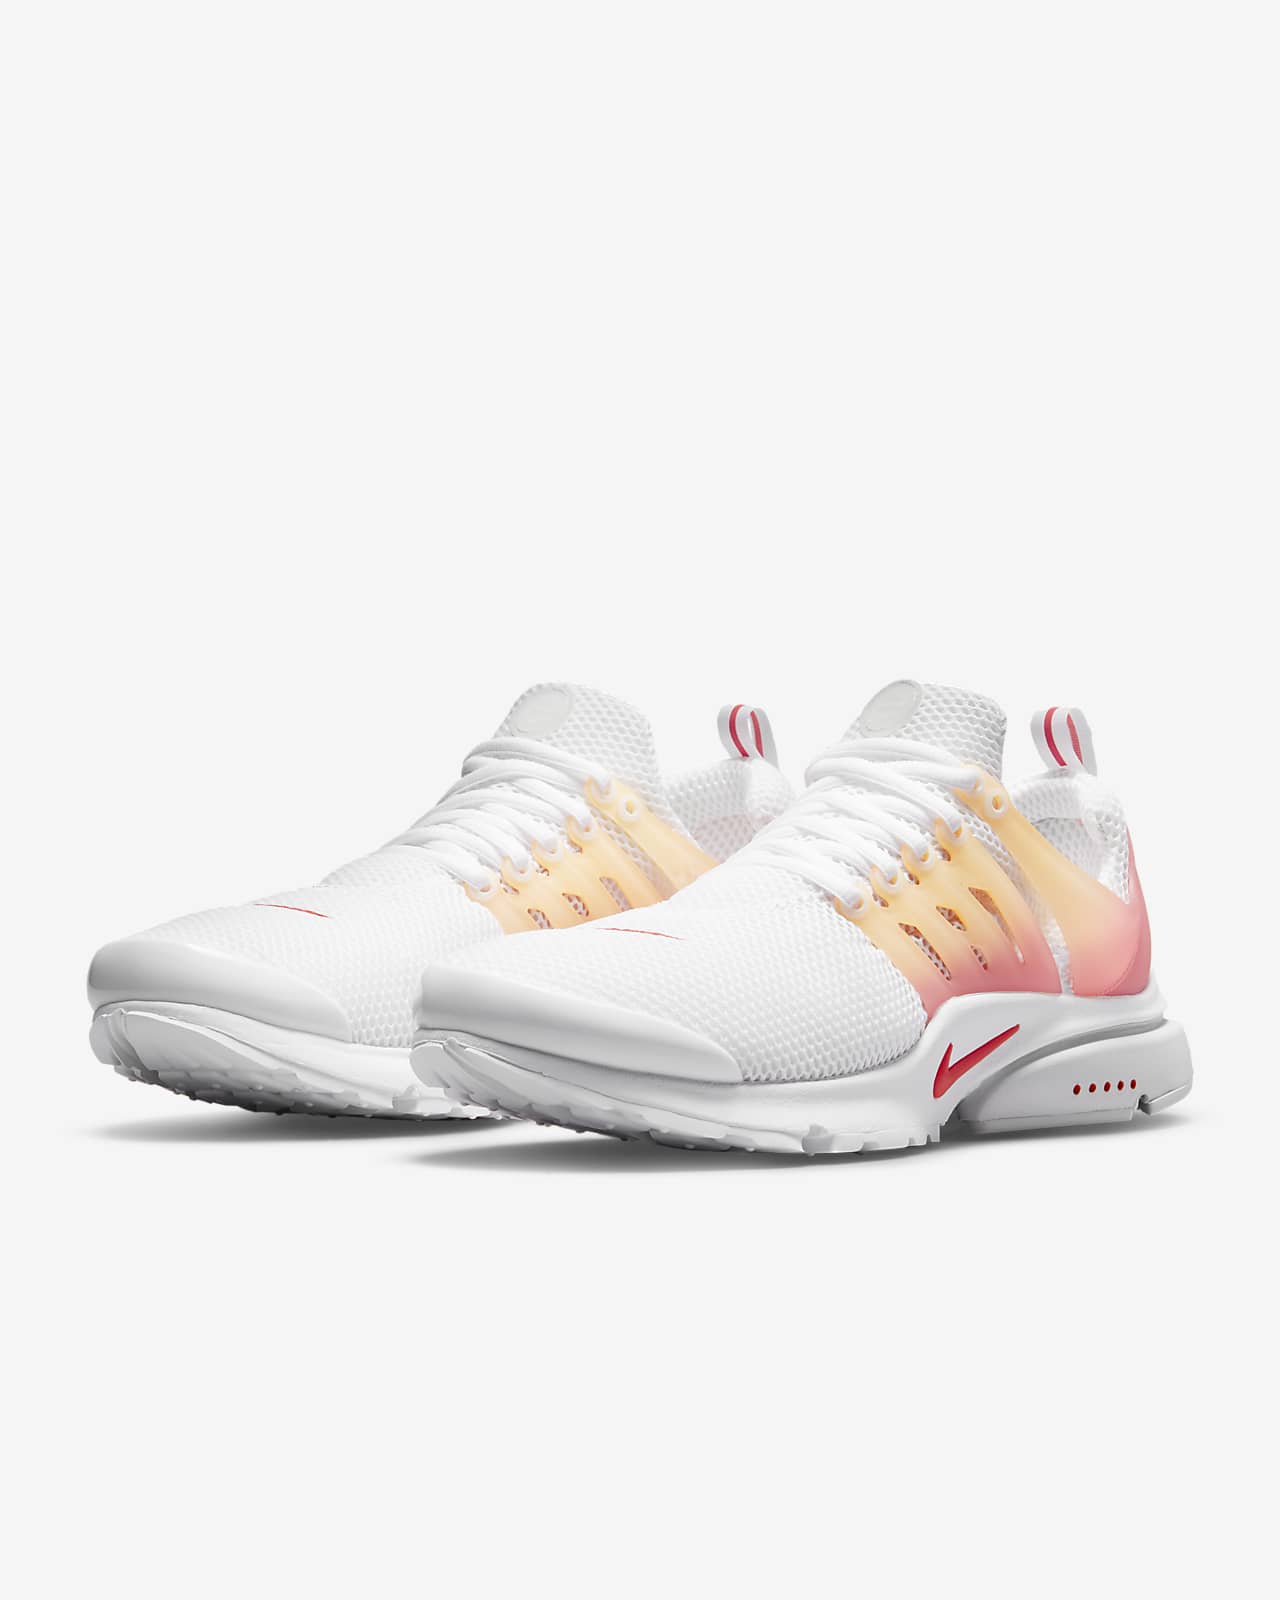 nike air presto shoes for women